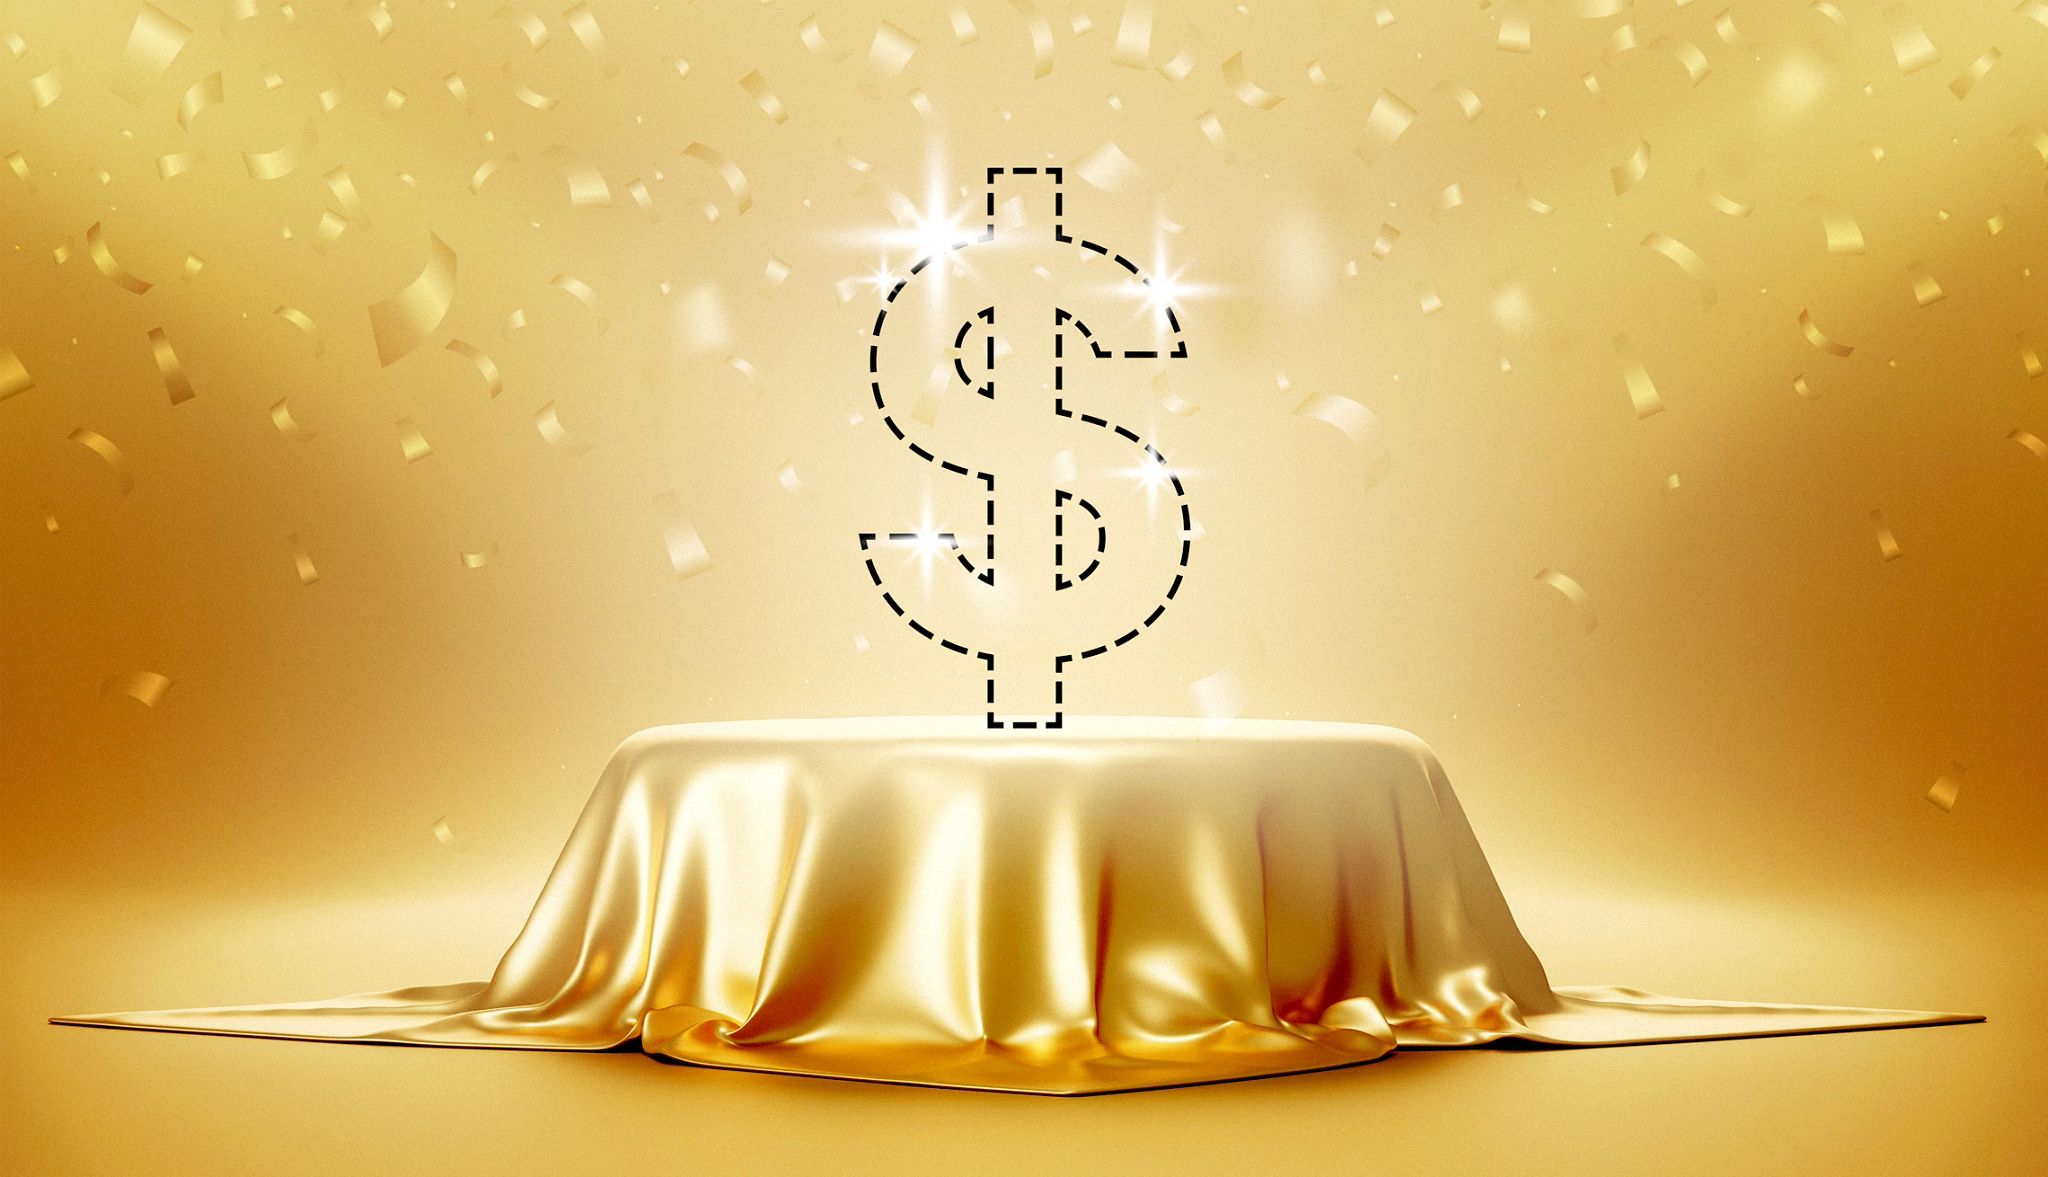 a dollar sign floats above a golden cloth covering an object